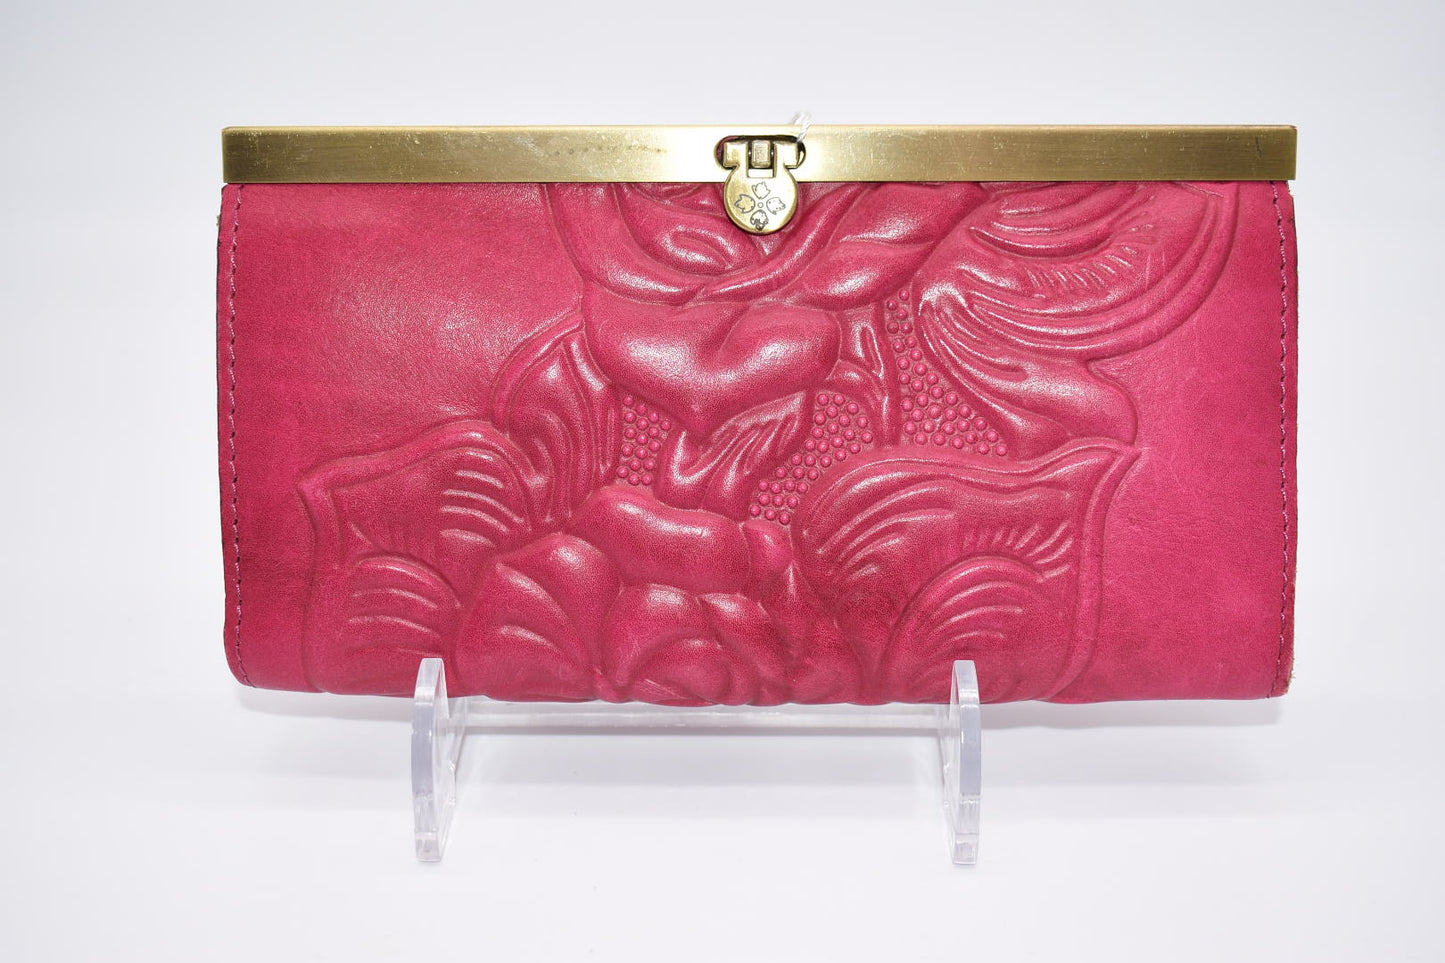 Patricia Nash Cauchy Wallet in Tooled Raspberry